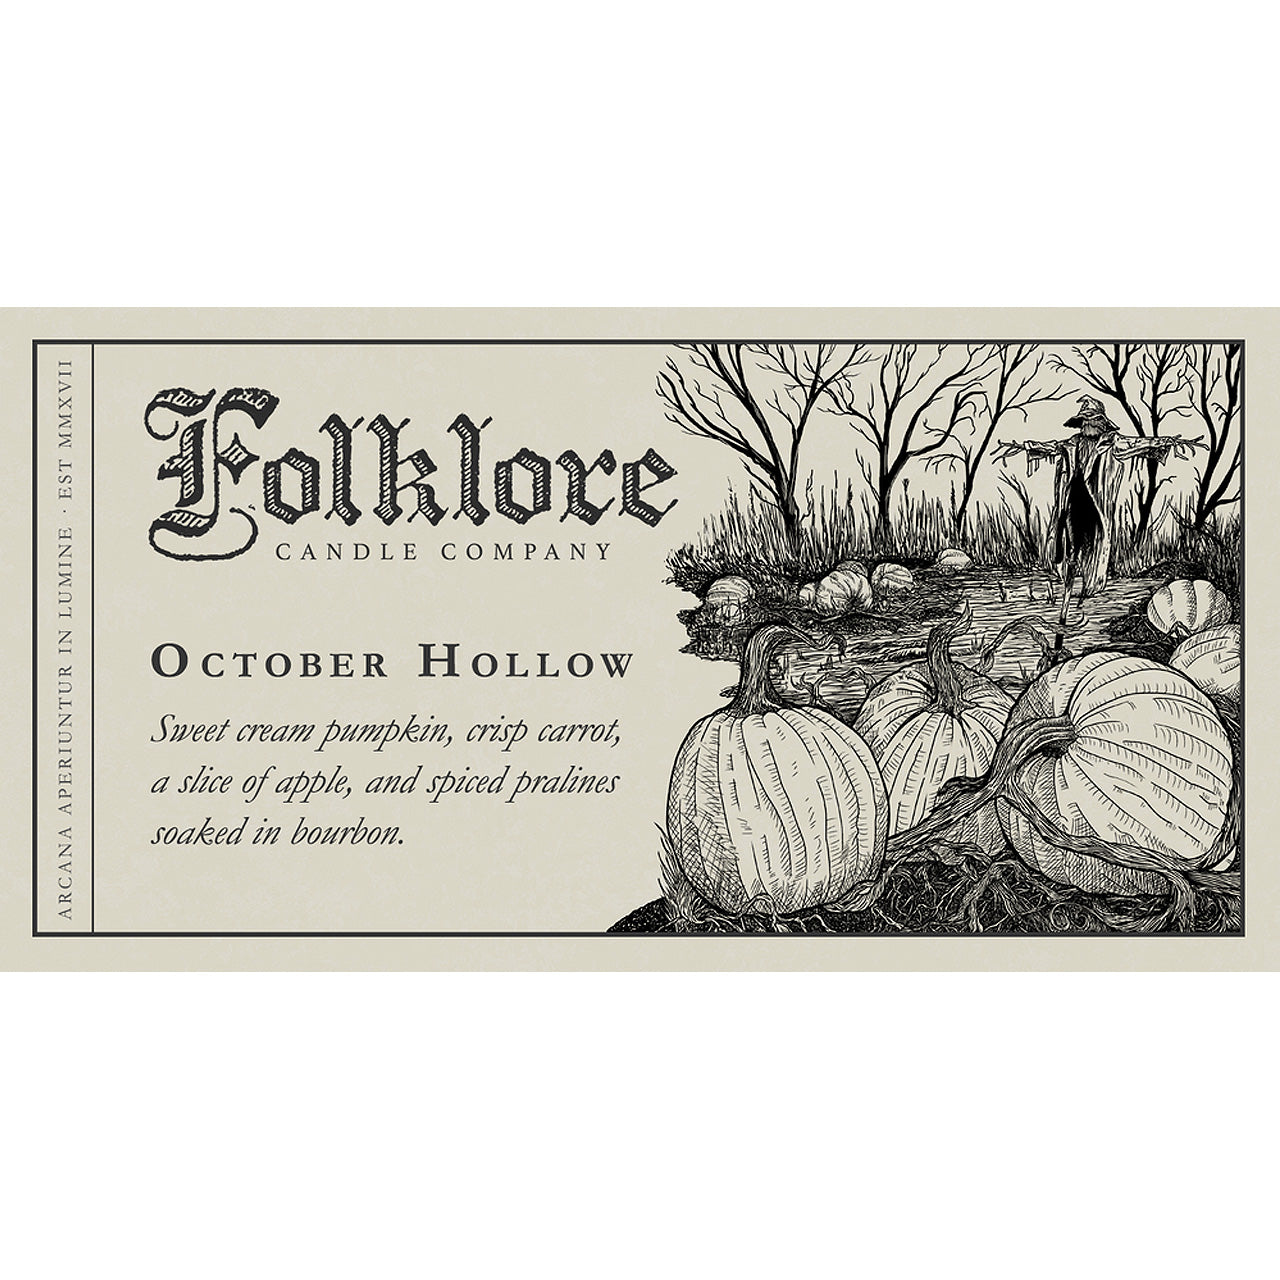 October Hollow - Folklore Candle Company